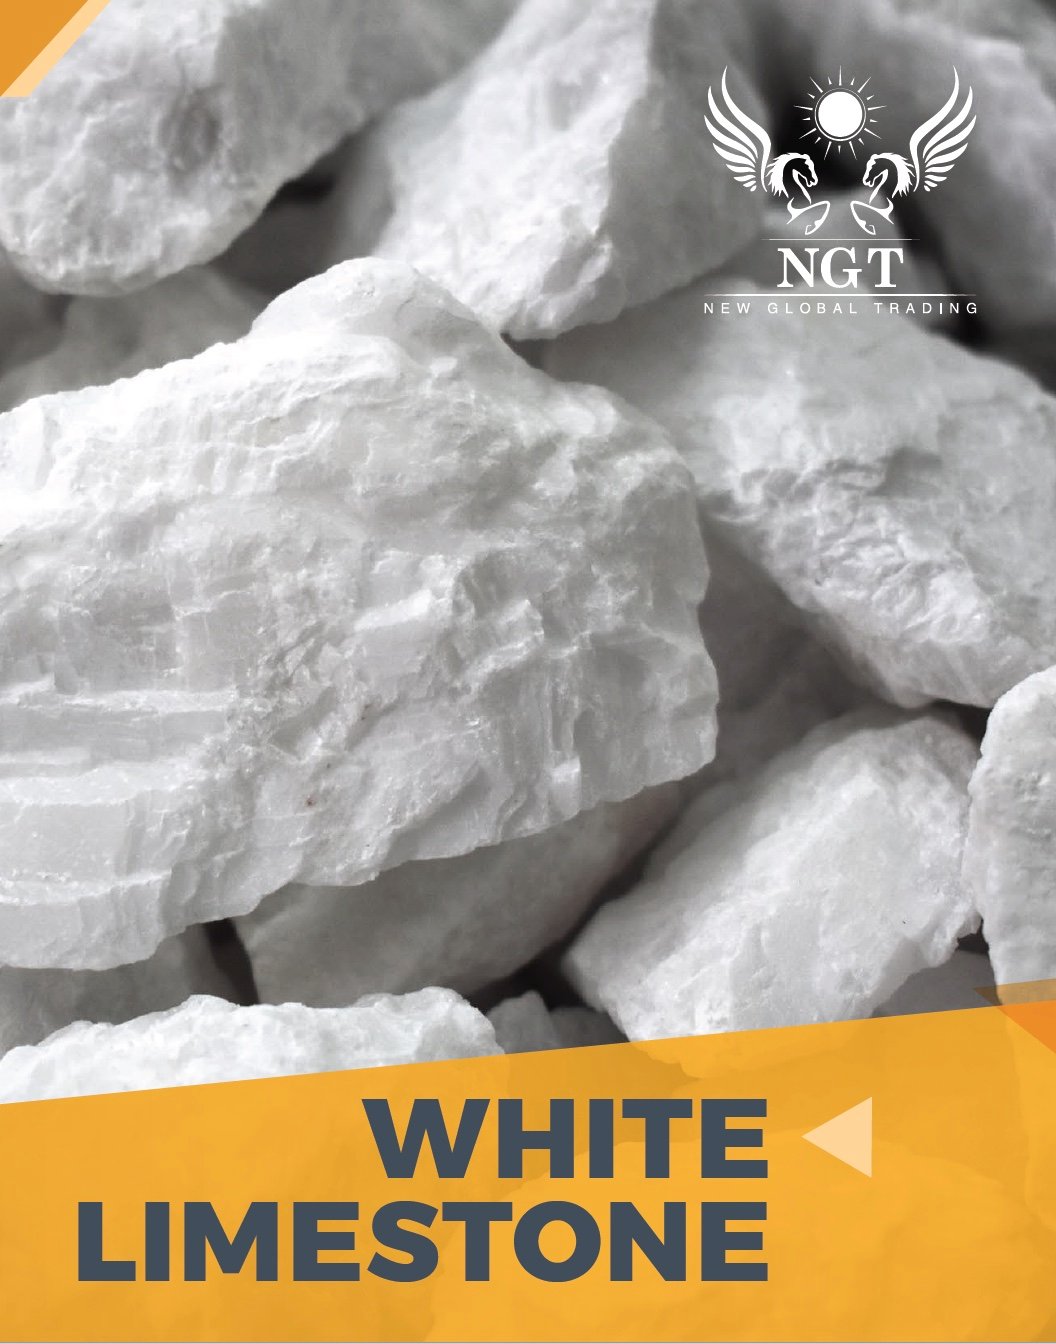 NGT Vietnam White Limestone Product Catalogue for Cement, Glass & Animal Feed Industries